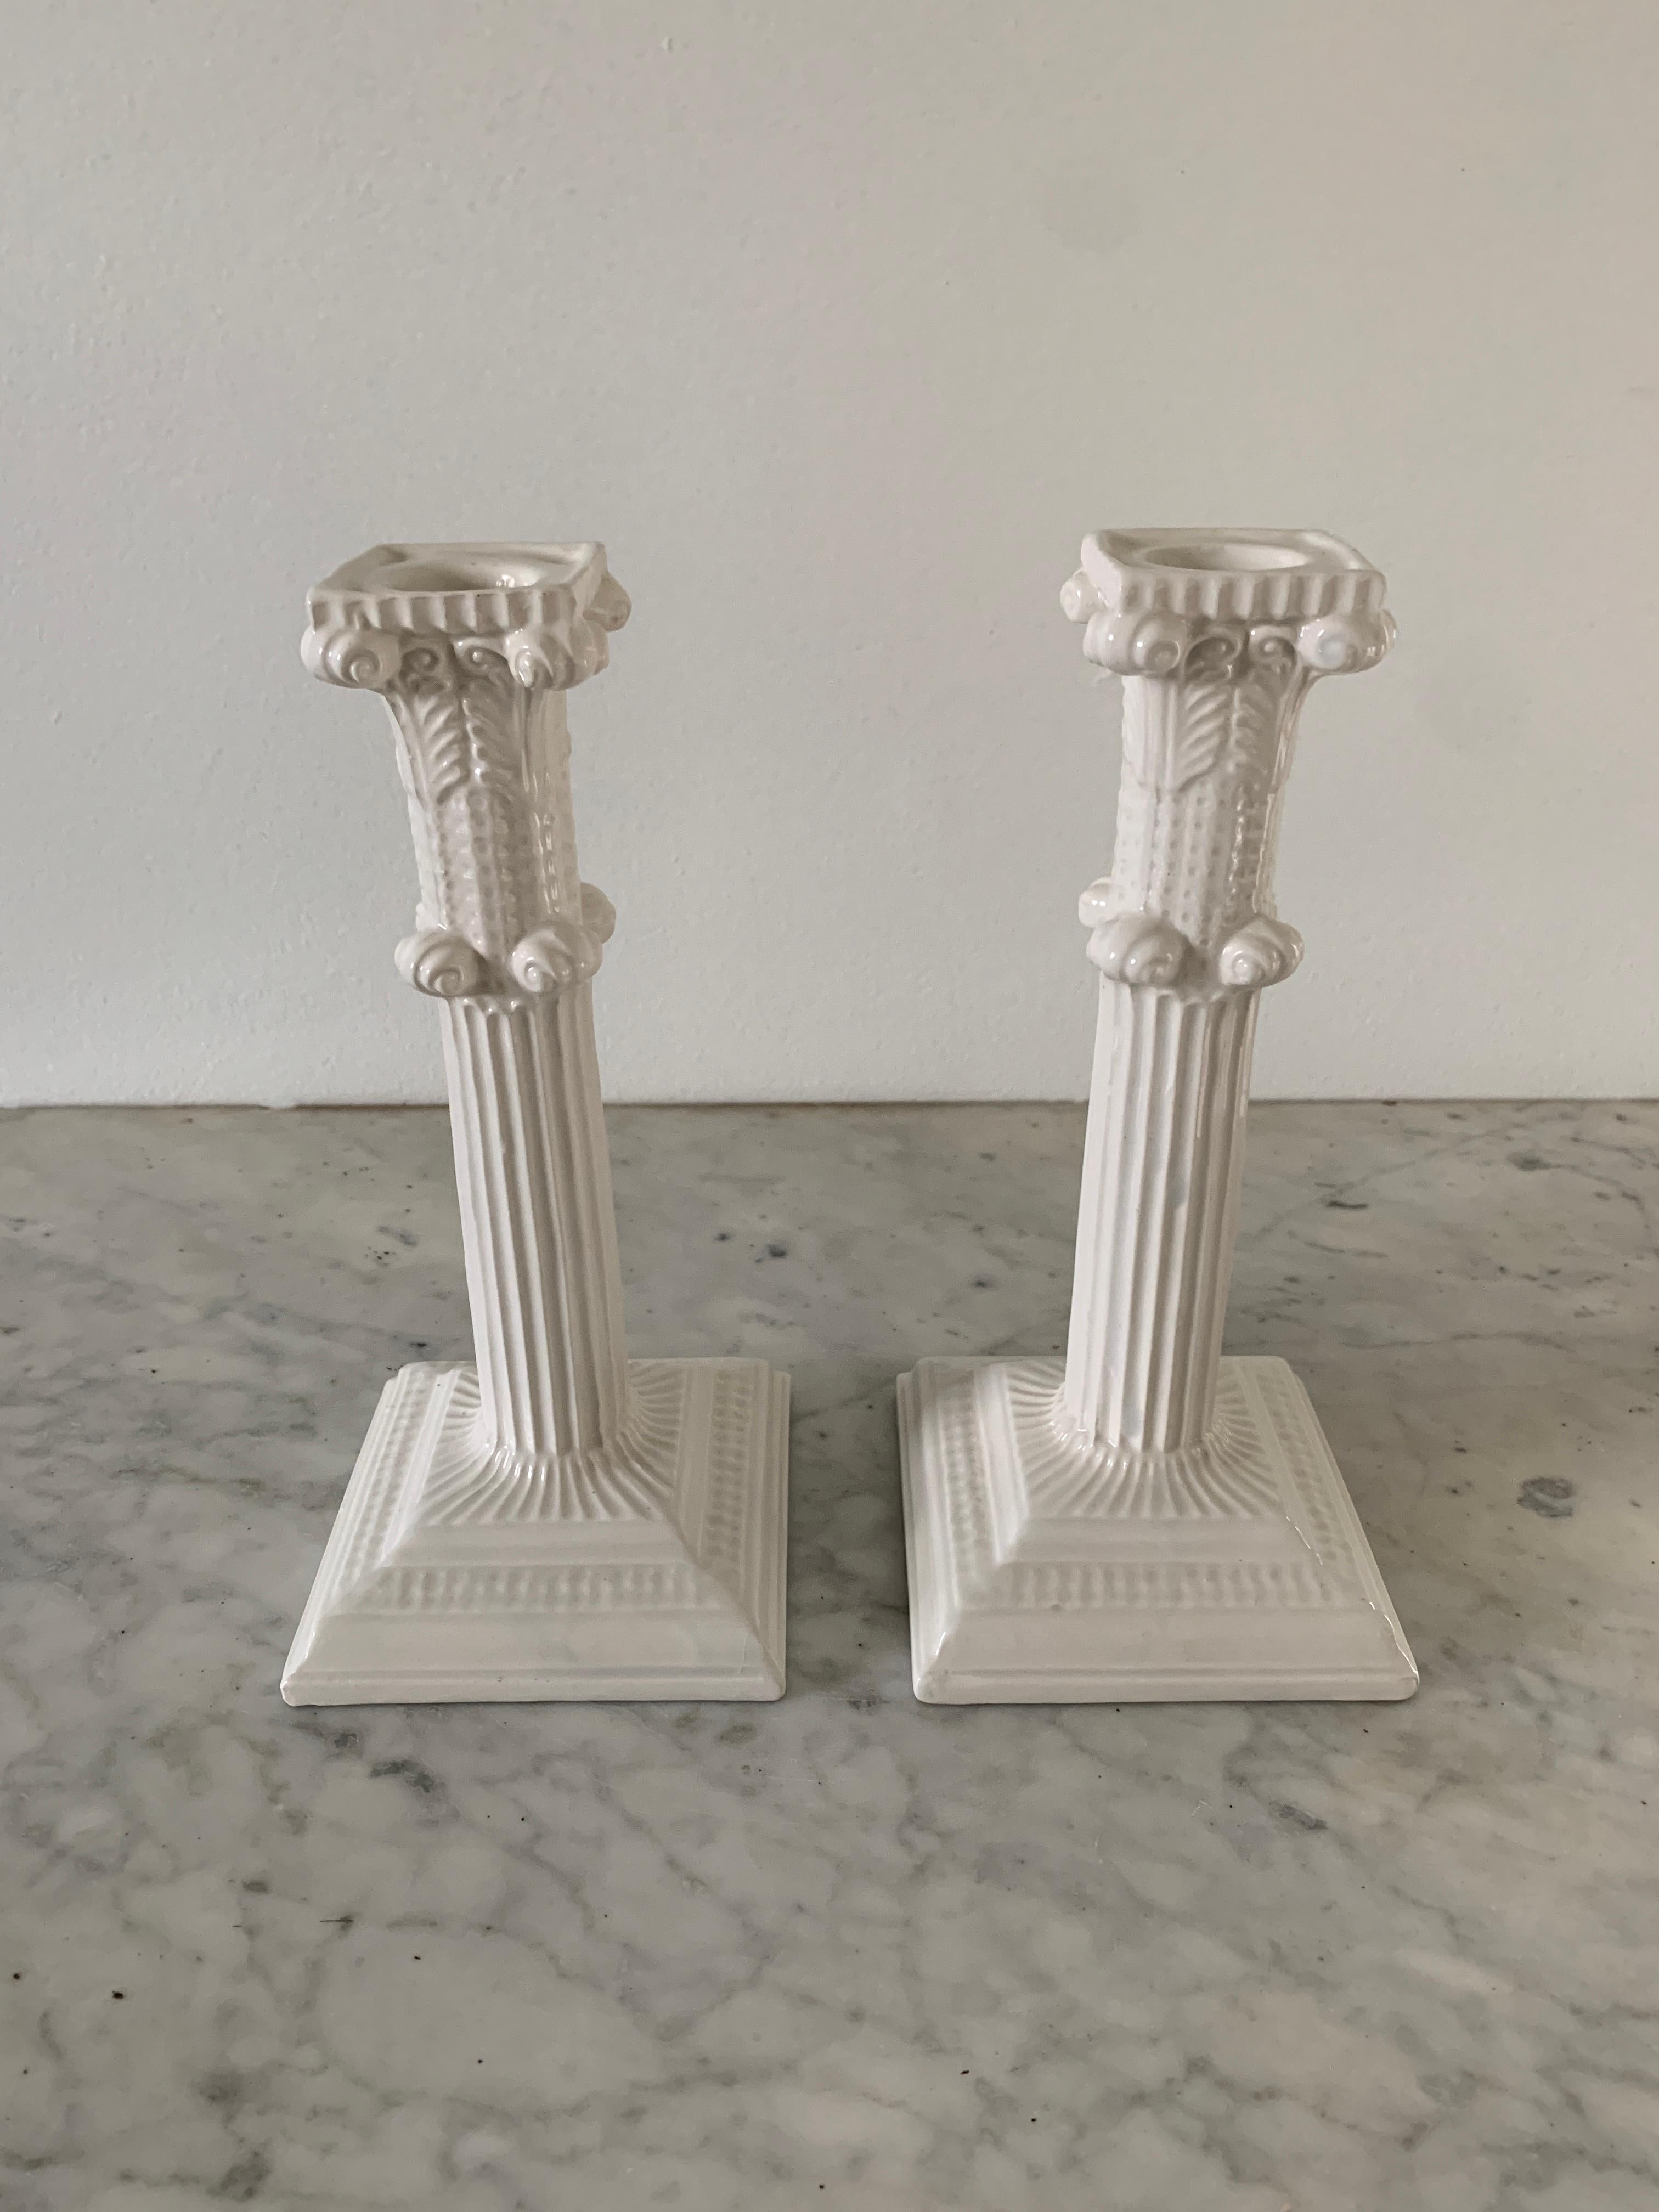 Italian Neoclassical Porcelain Column Candle Holders by Mottahedeh, Pair 3